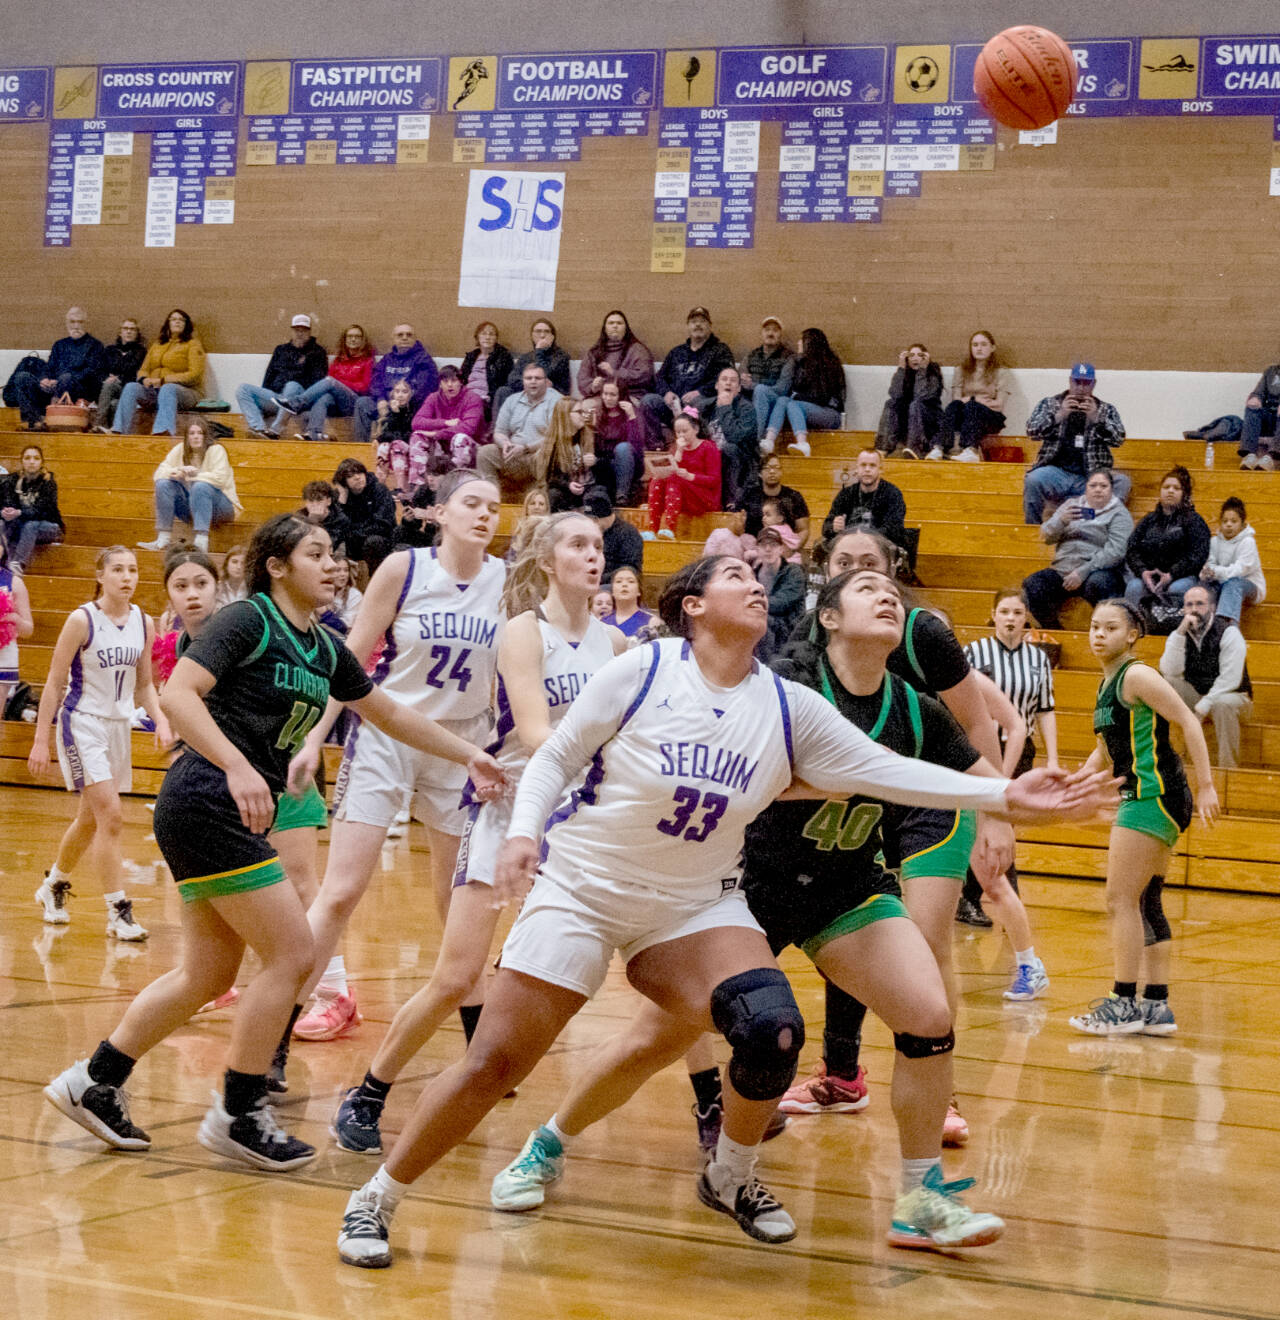 Sequim’s Jelissa Julmist battles with Clover Park’s Alicia-Ellalynn Solai for a rebound in Tuesday’s District 2/3 first-round tournament game. Sequim went on a 23-0 run in the third quarter en route to a 65-29 win and has already qualified for the state 2A tournament. (Emily Matthiessen/Olympic Peninsula News Group)